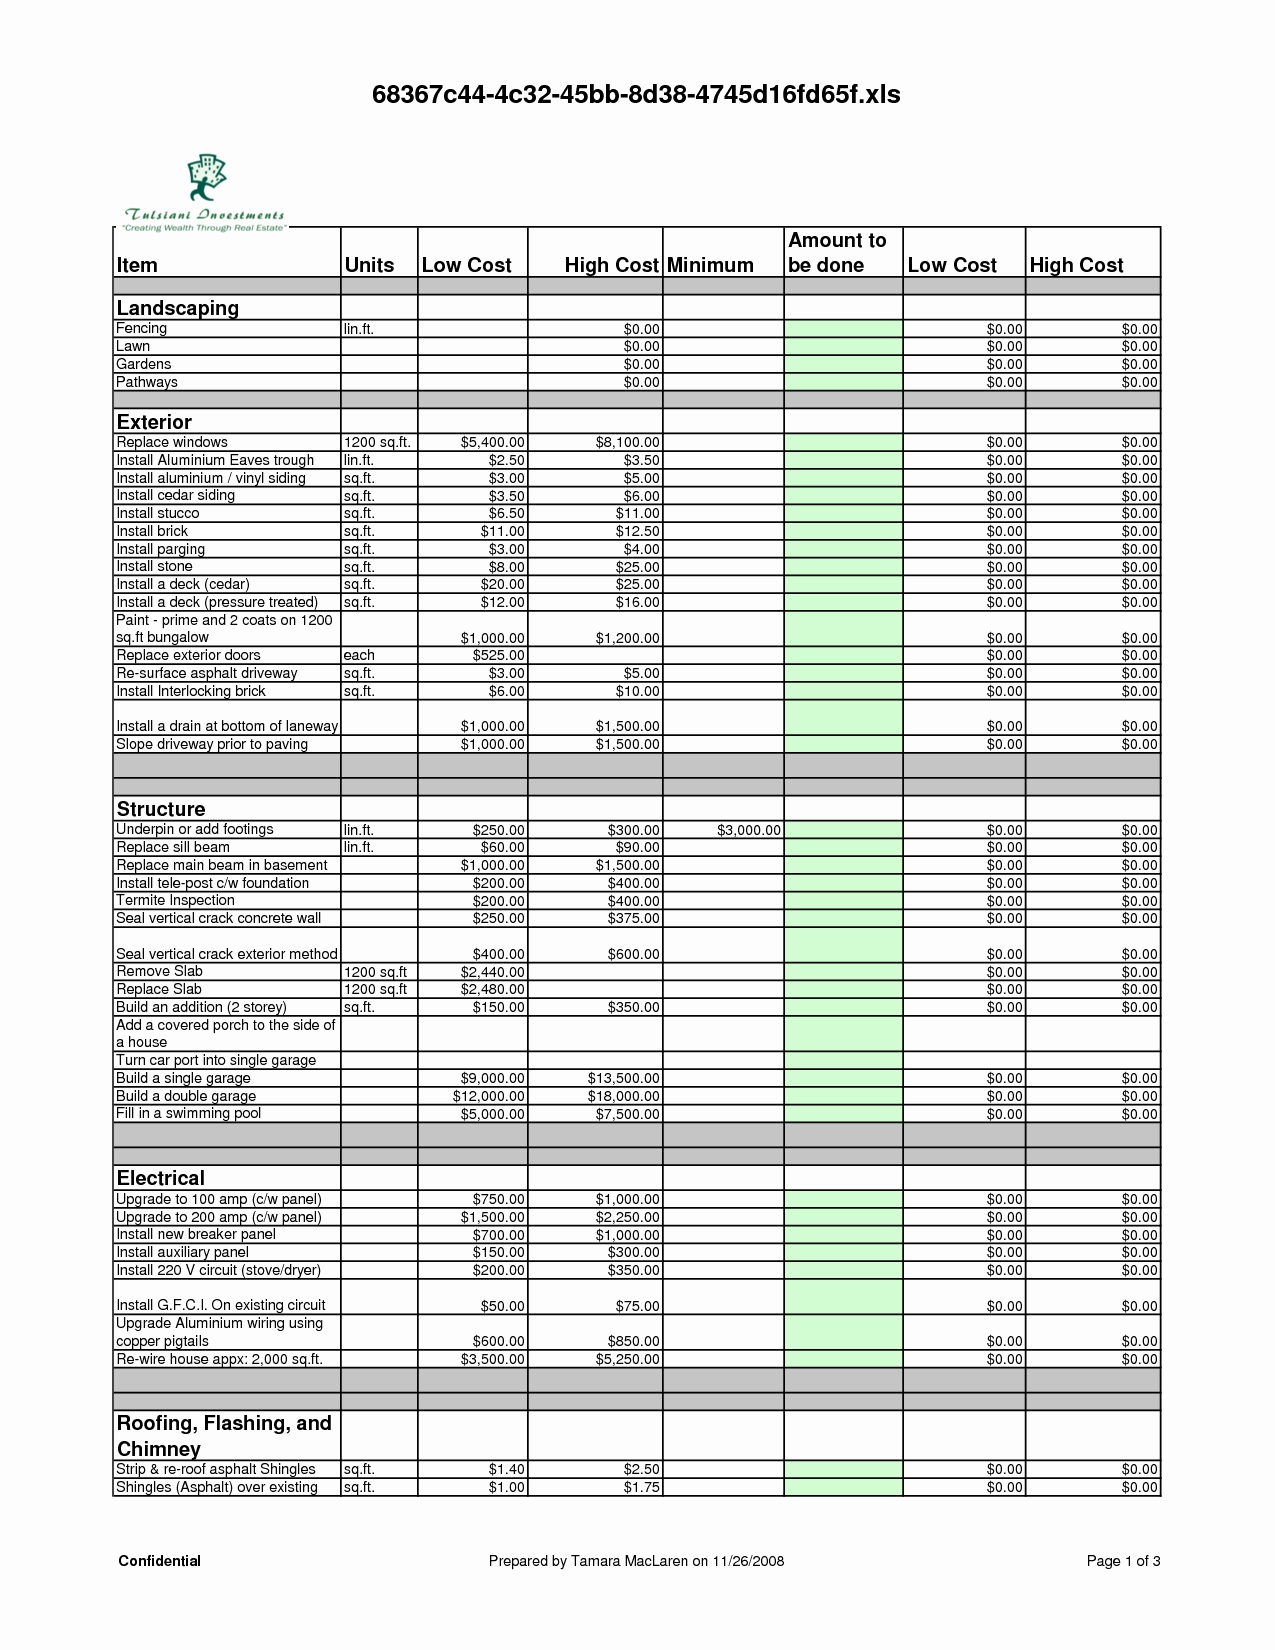 Residential Construction Cost Breakdown Excel Lovely Estimating with Estimating Spreadsheets